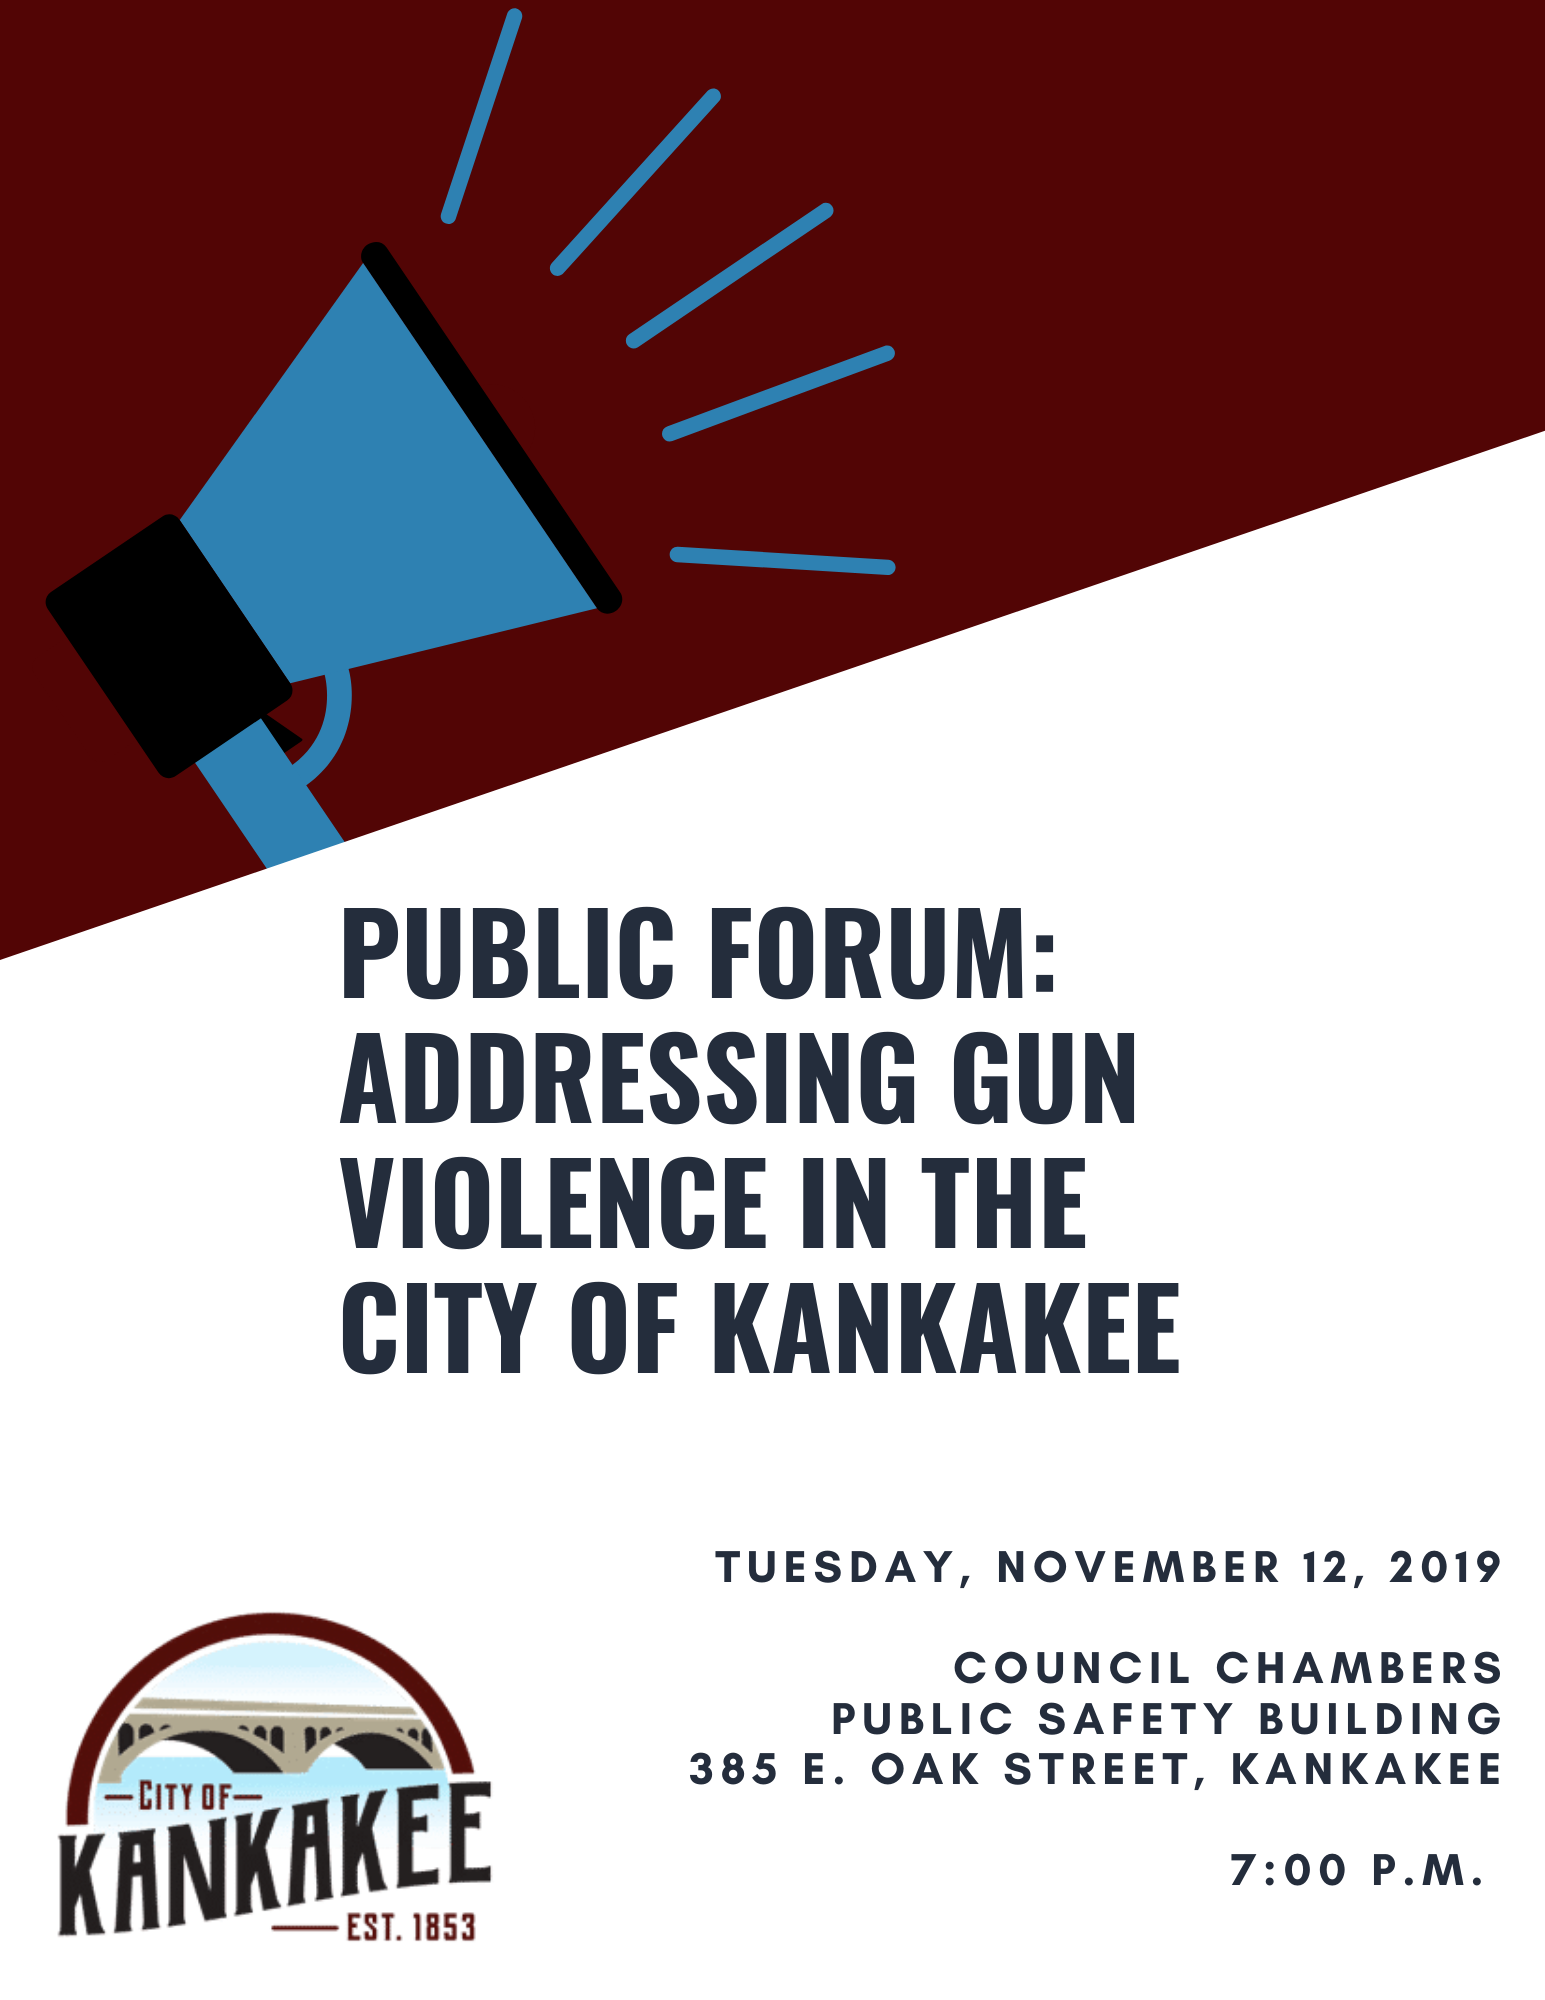 PUBLIC FORUM: ADDRESSING GUN VIOLENCE IN THE CITY OF KANKAKEE